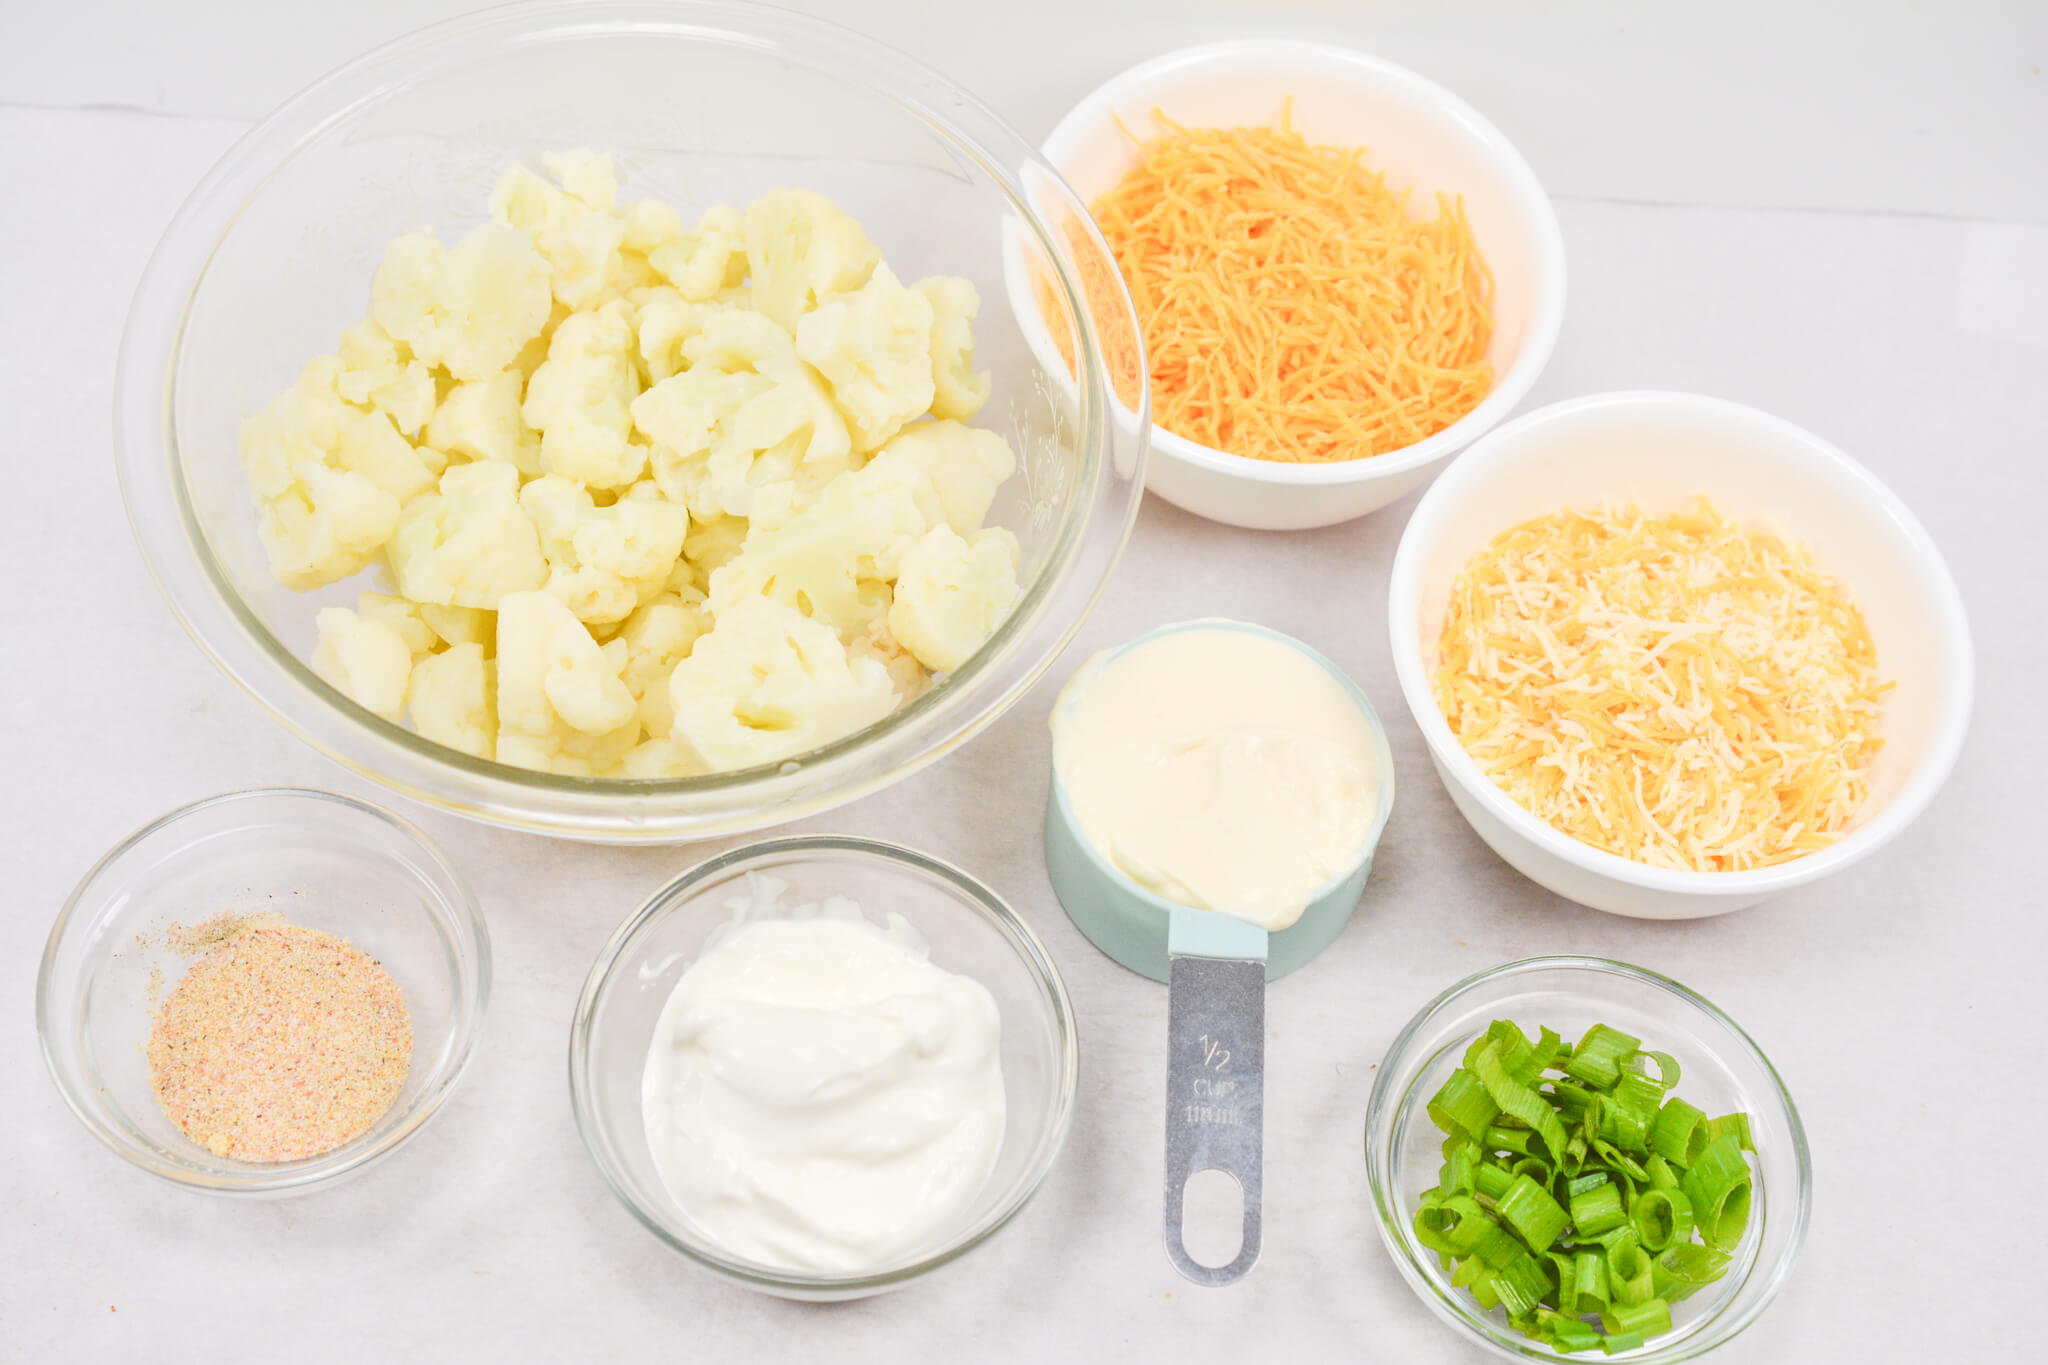 Cheese, cauliflower and other ingredients to make the dish.